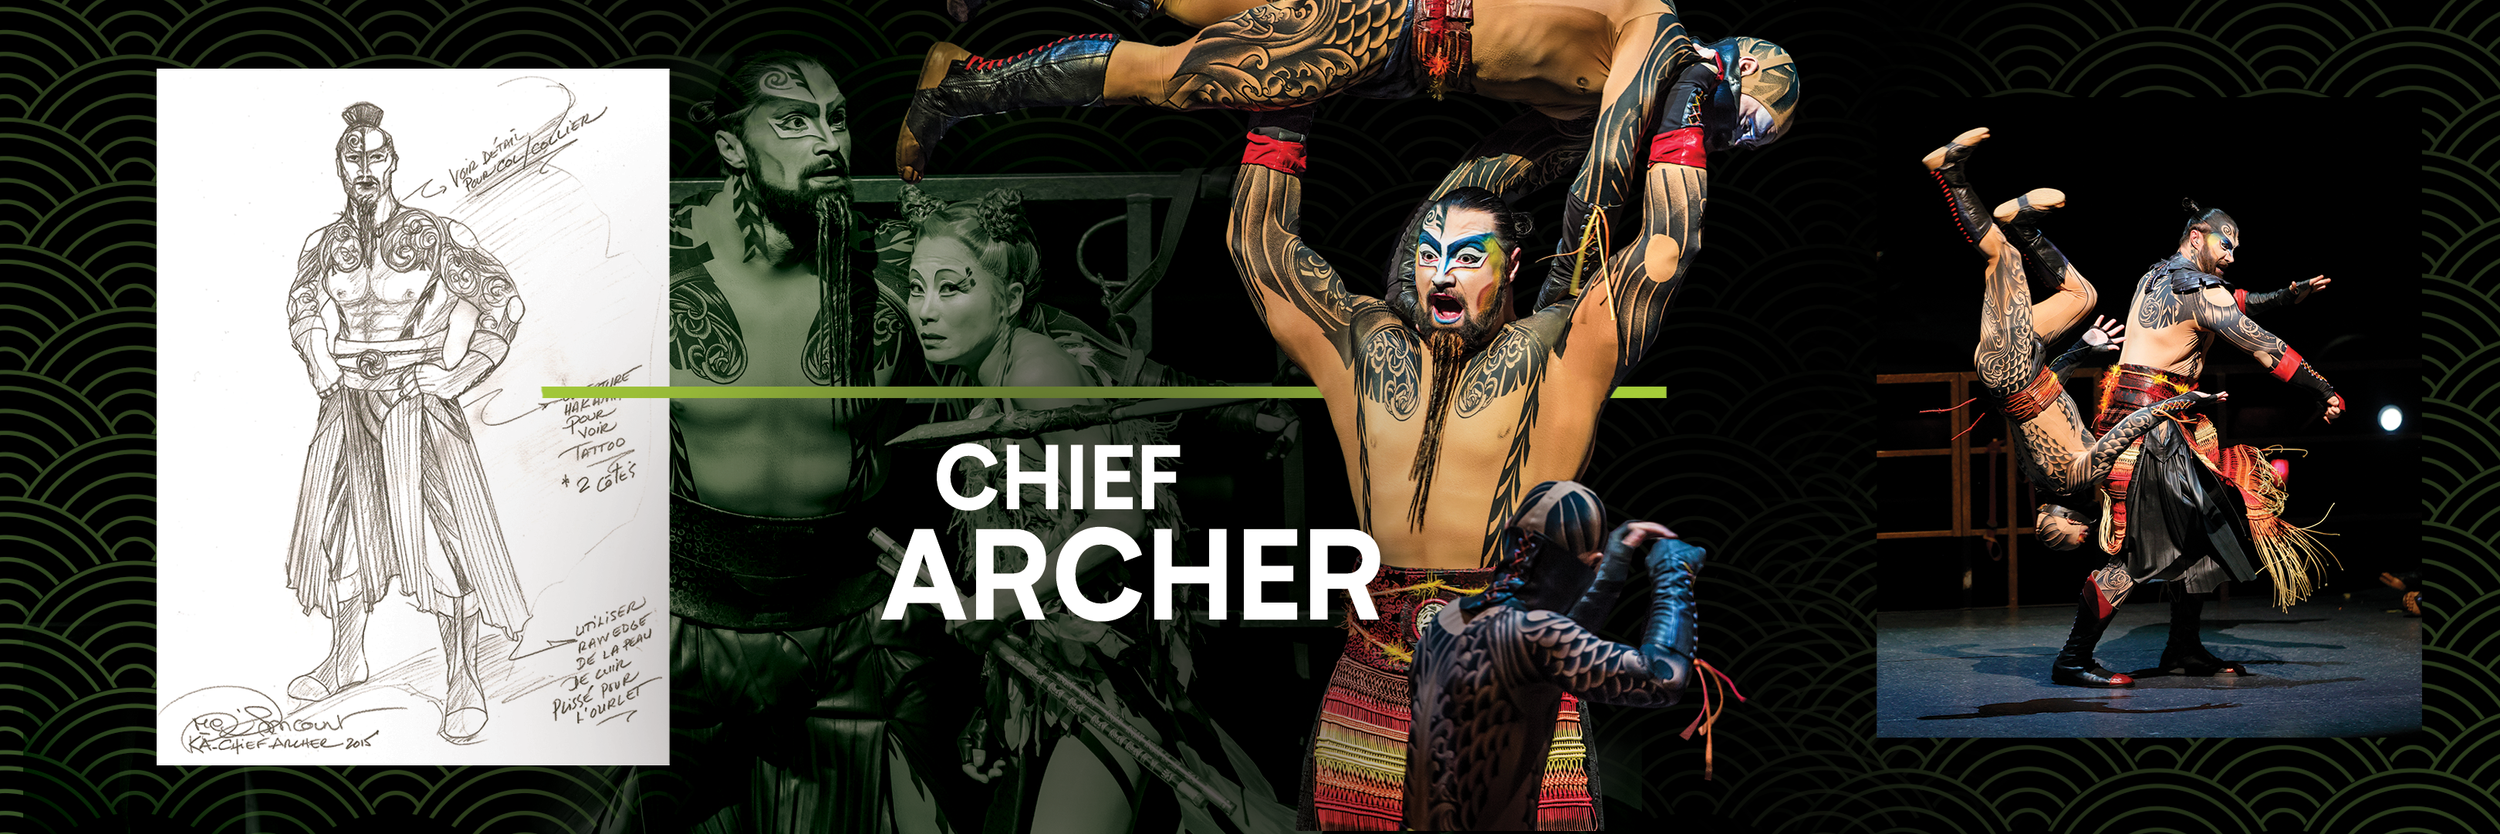 chief_archer_costume_highlight (3).png